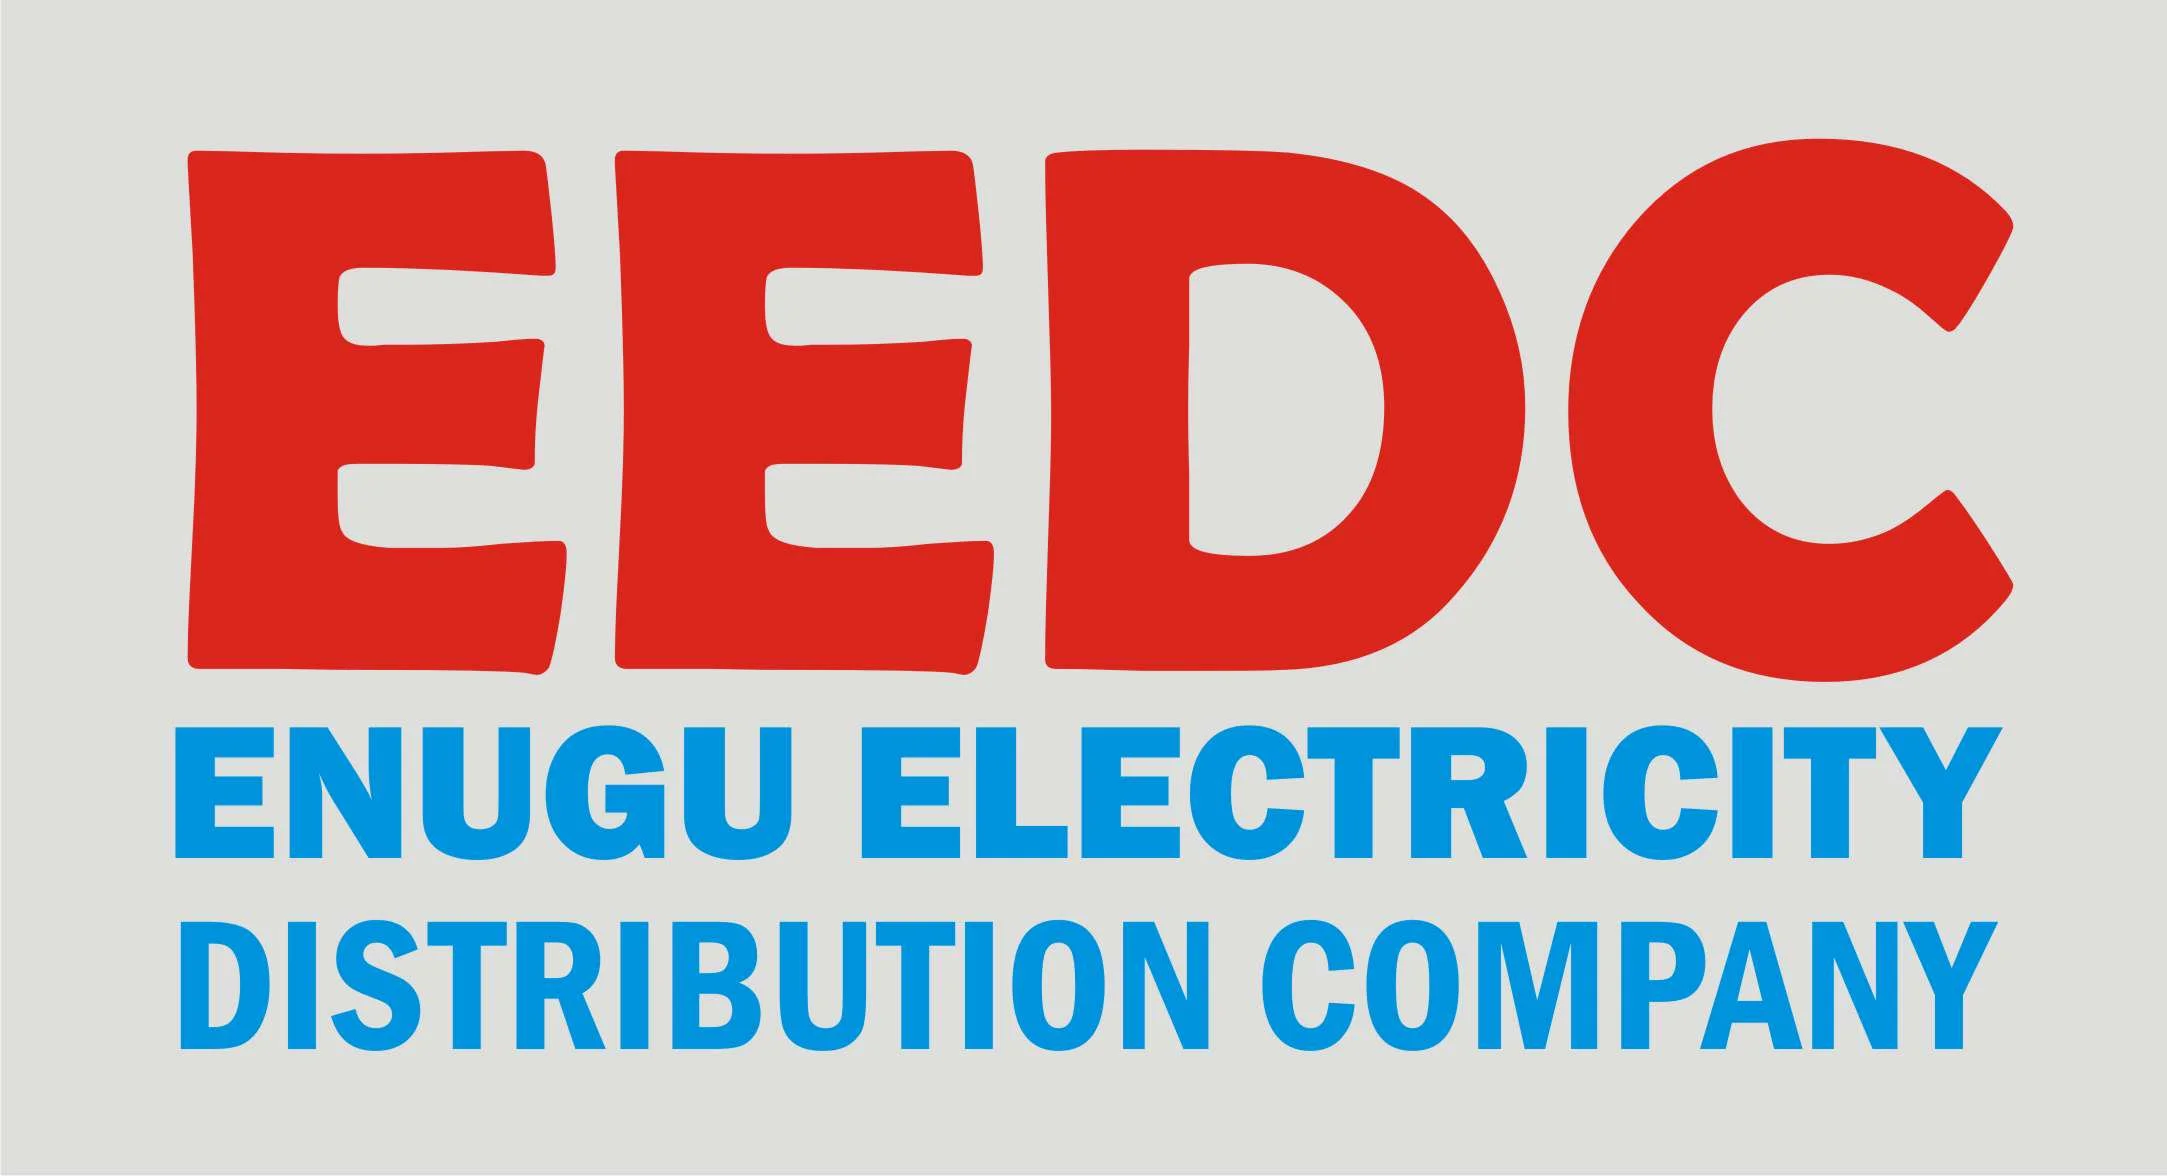 EEDC reduces tariff for customers in South-East